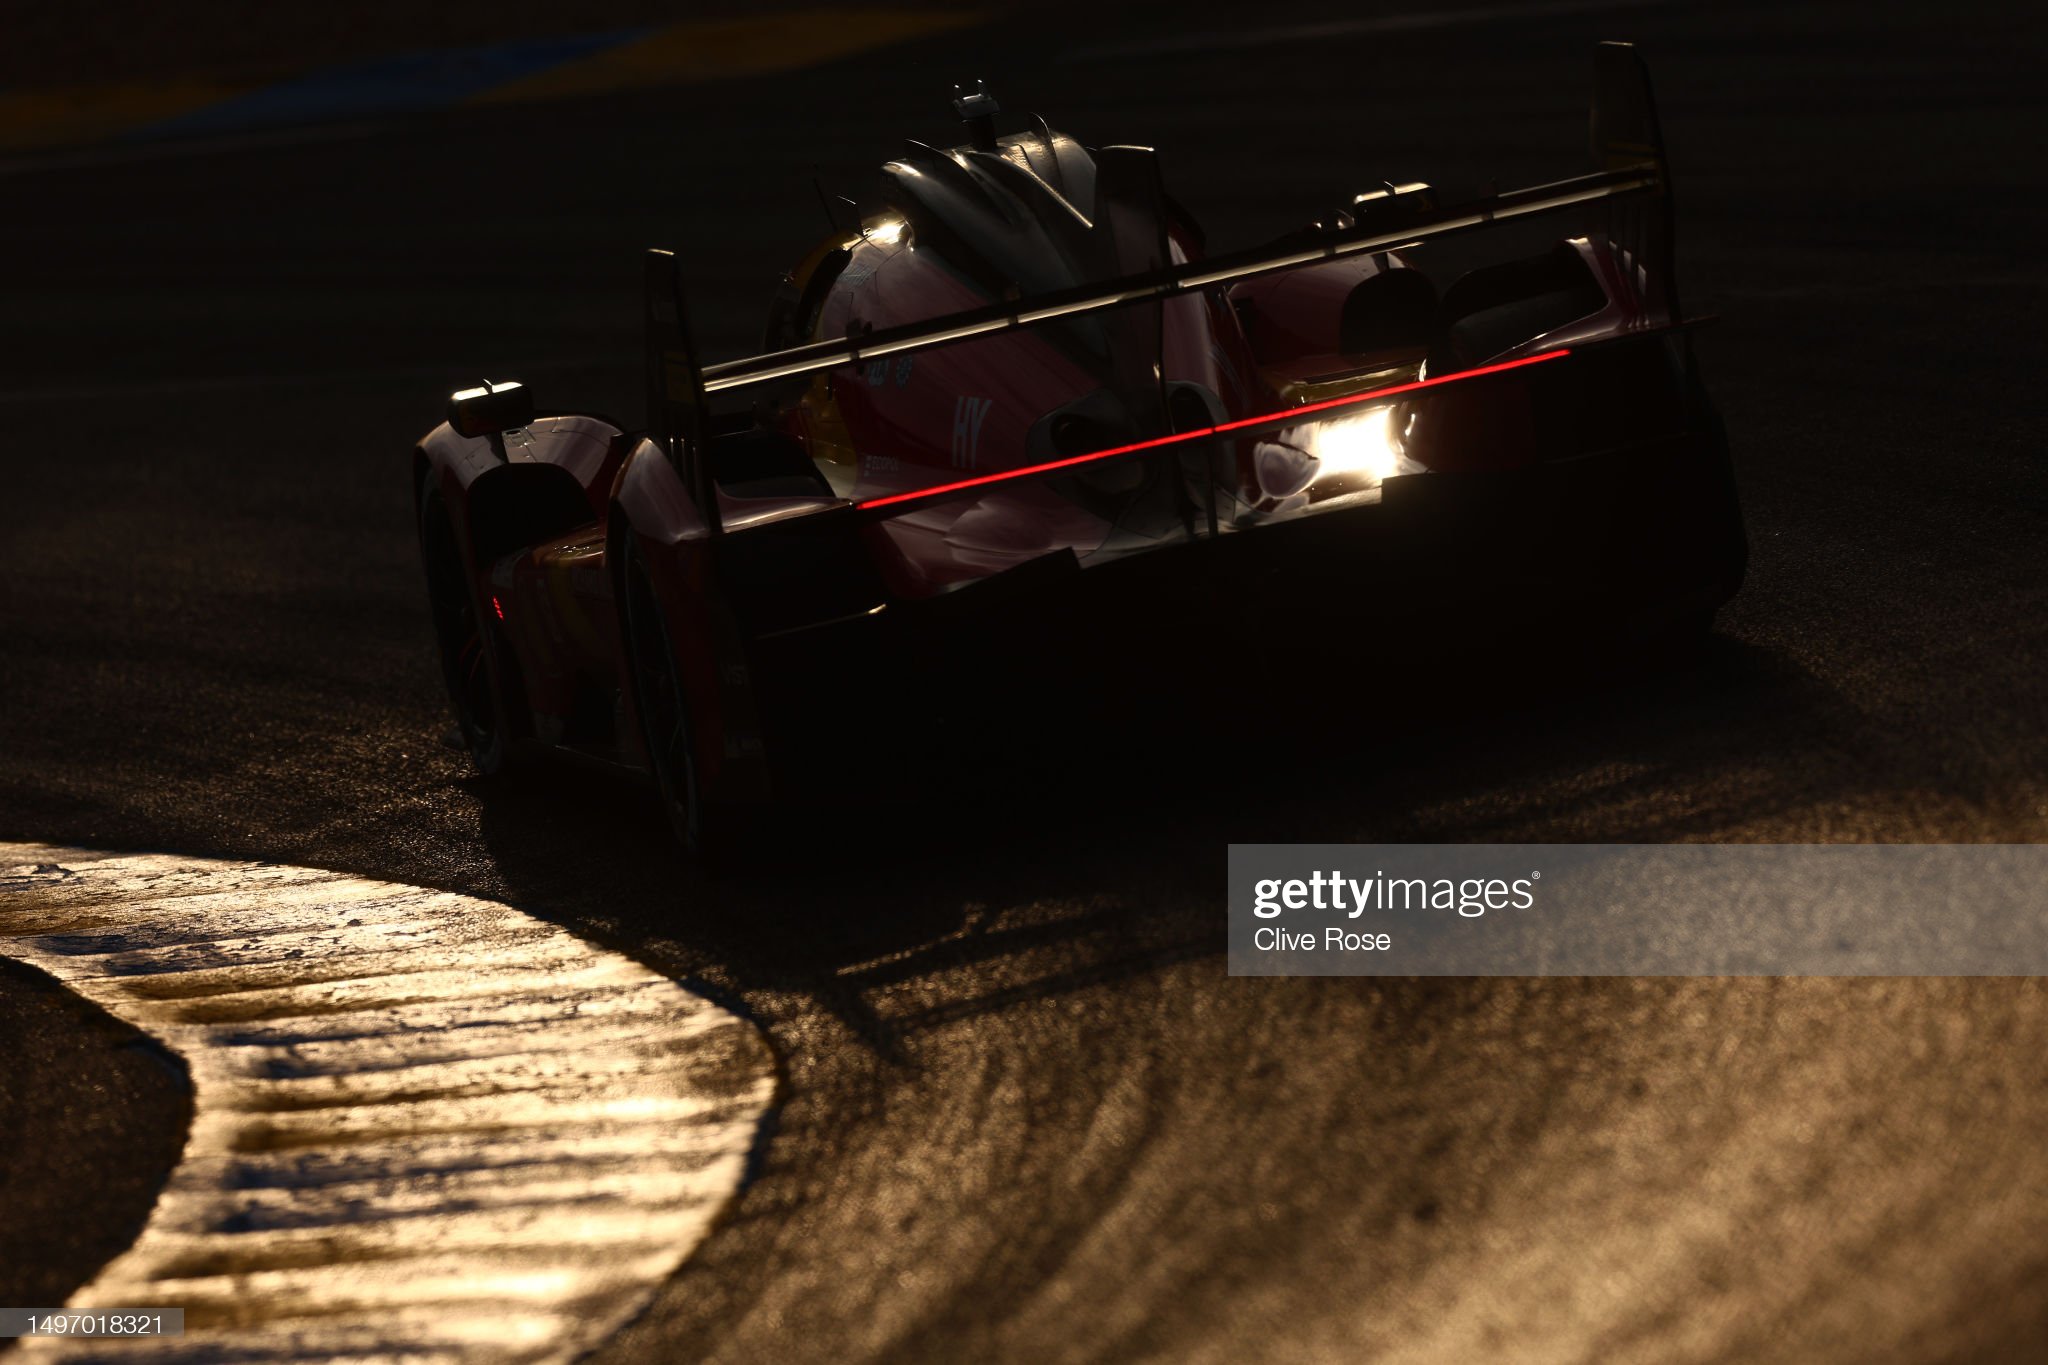 The Ferrari 499P AF Corse of Antonio Fuoco, Miguel Molina and Nicklas Nielsen drives during the hyperpole shoot out ahead of the 100th anniversary of the 24 Hours of Le Mans at the Circuit de la Sarthe on June 08, 2023 in Le Mans, France. 